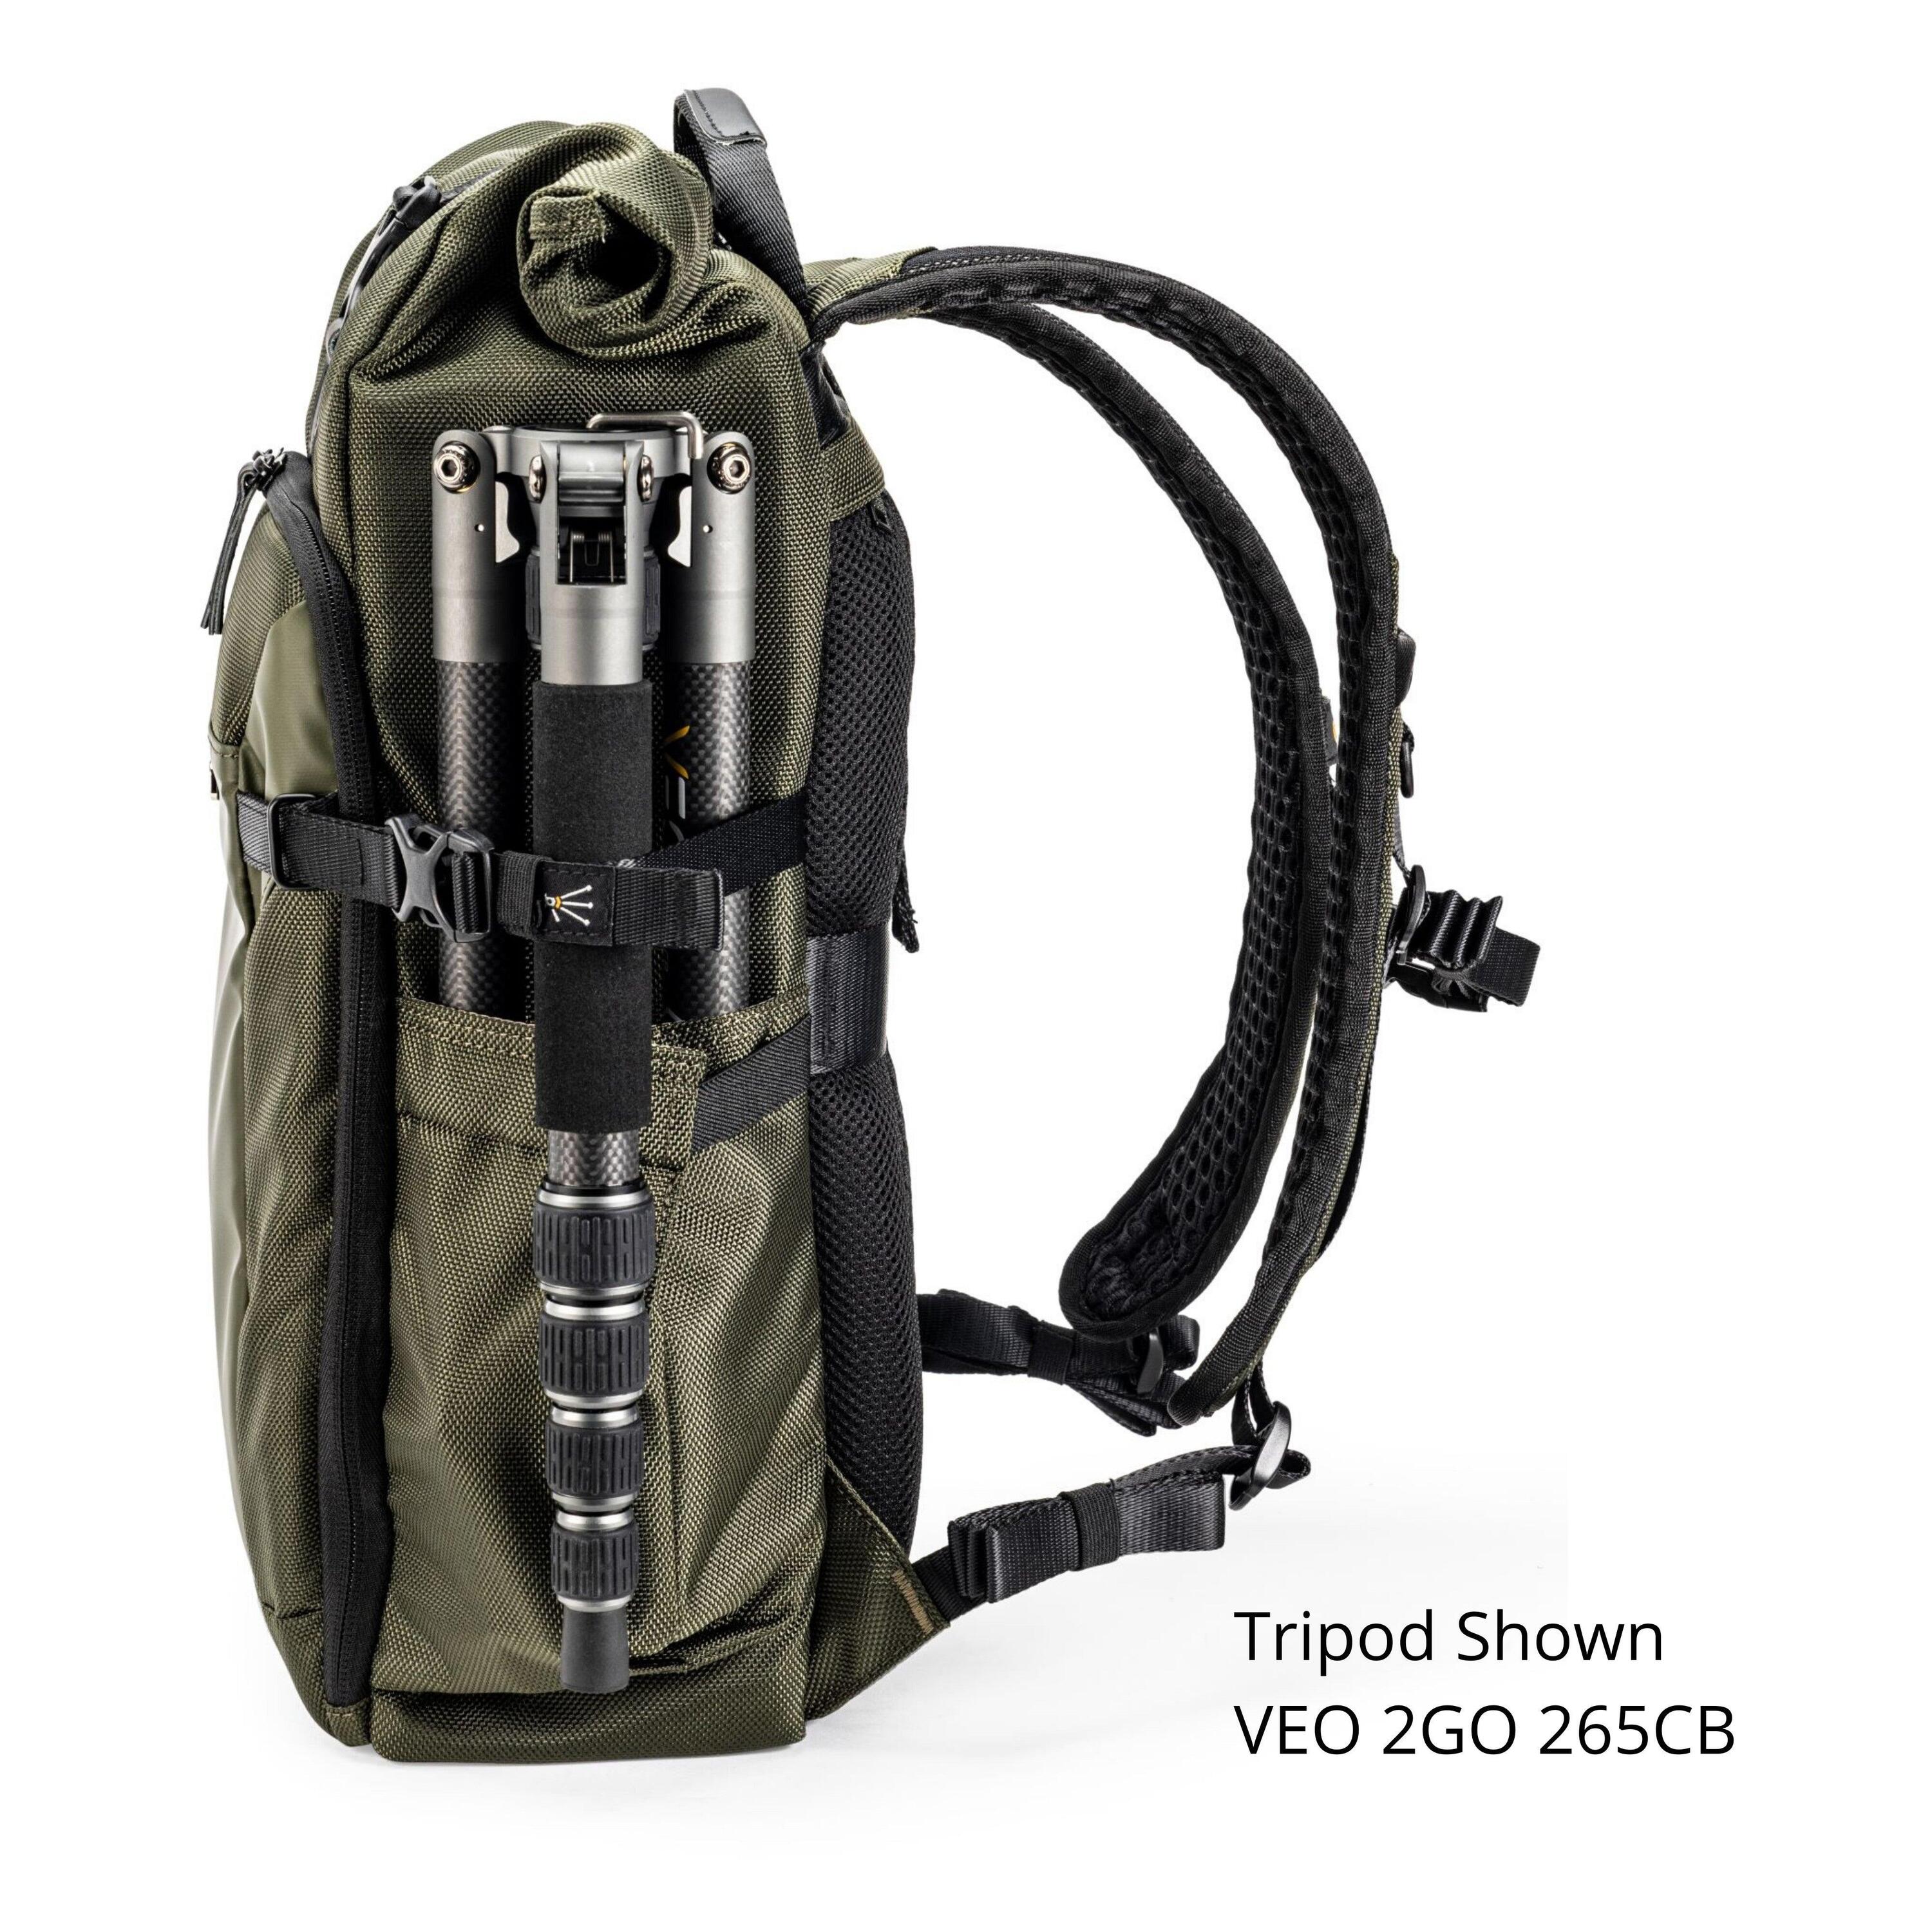 VEO Select 43RB GR - Roll-Top Camera Backpack - Green 5/5